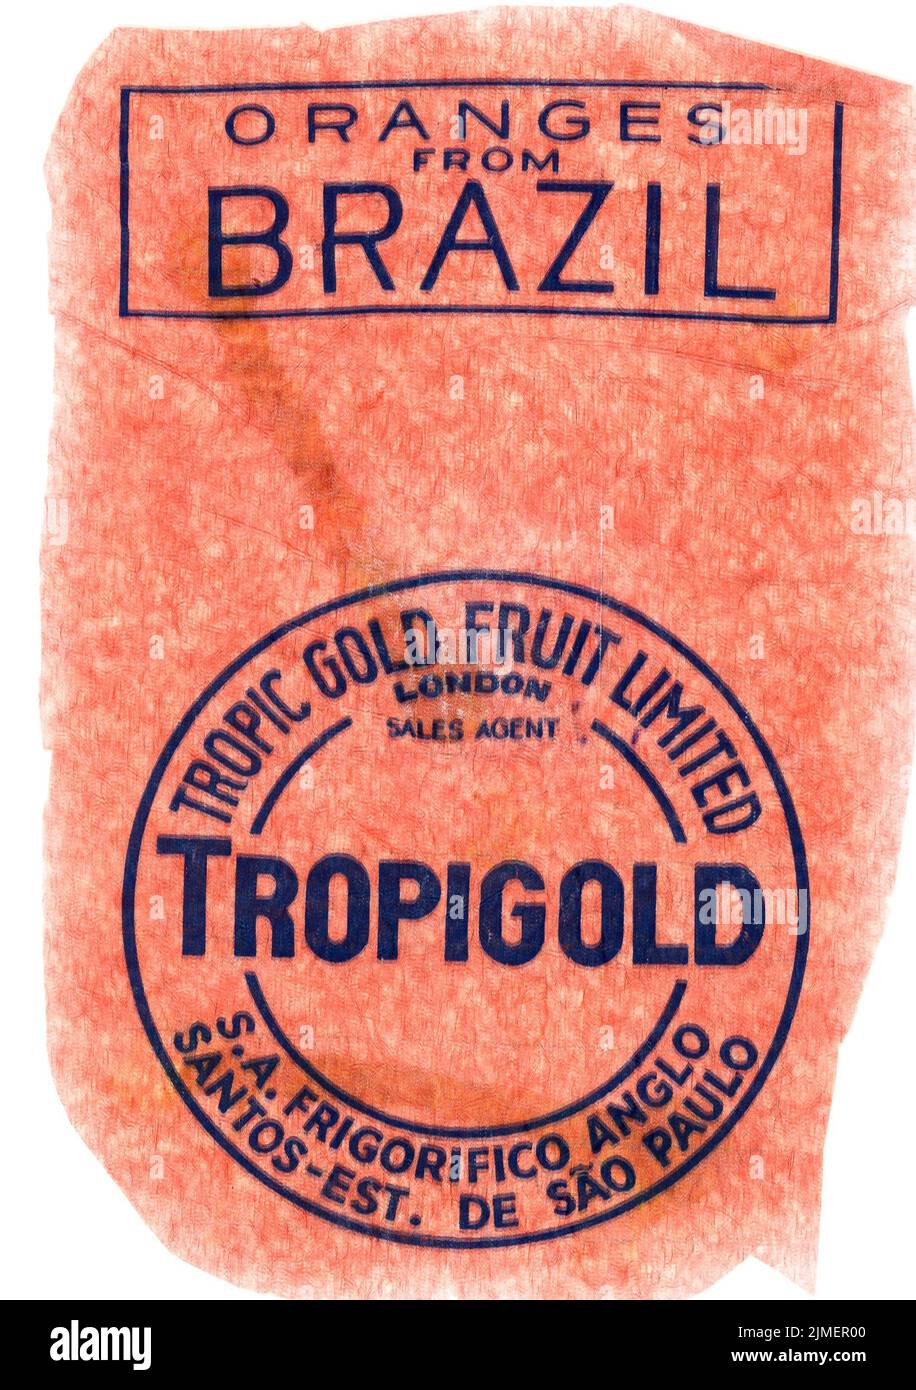 Fresh fruit tissue paper wrapper, from mid-1950s England, with grower's trade mark.Tropigold, oranges from Brazil. Blue print on orange tissue, Stock Photo